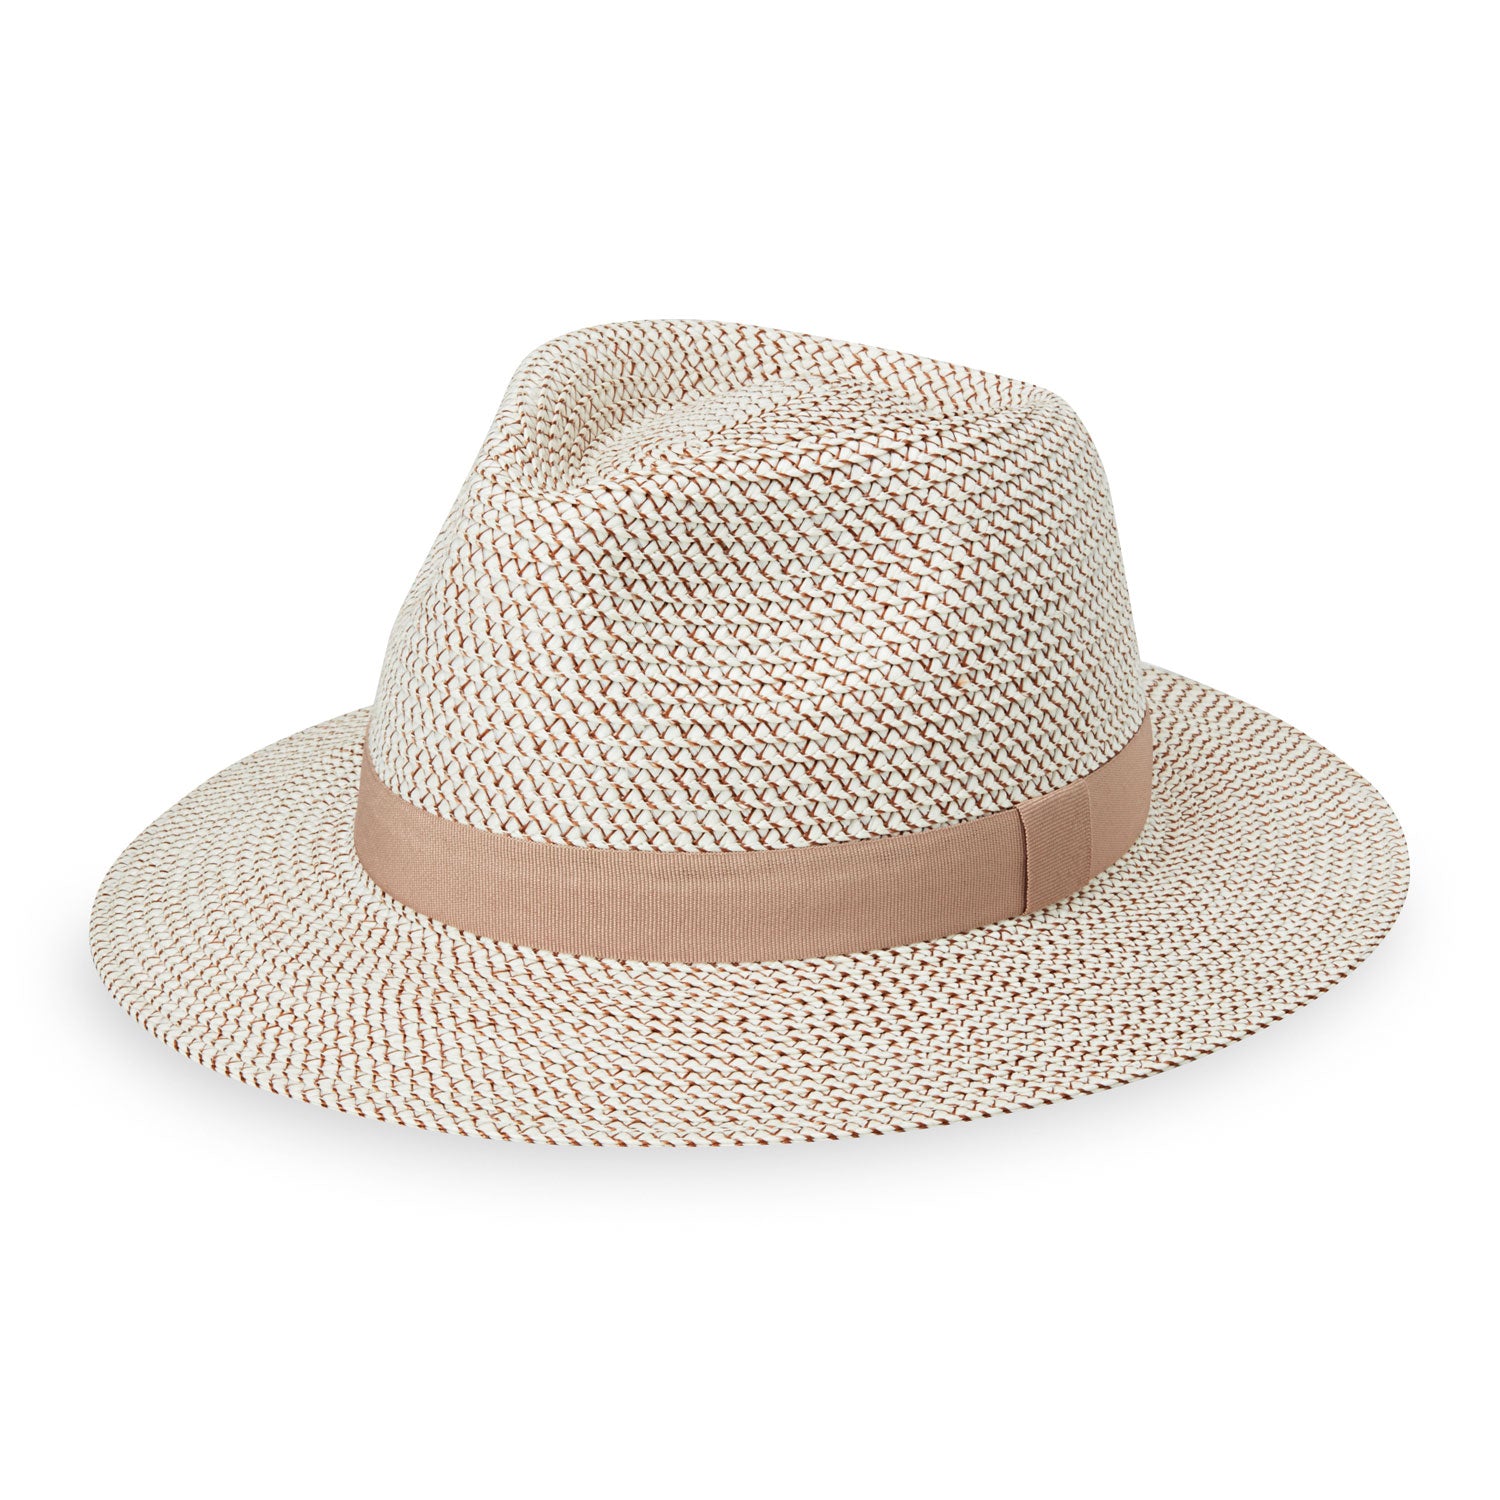 Featuring Front of Women's Packable Fedora Style Petite Charlie UPF Sun Hat in Ivory Taupe from Wallaroo